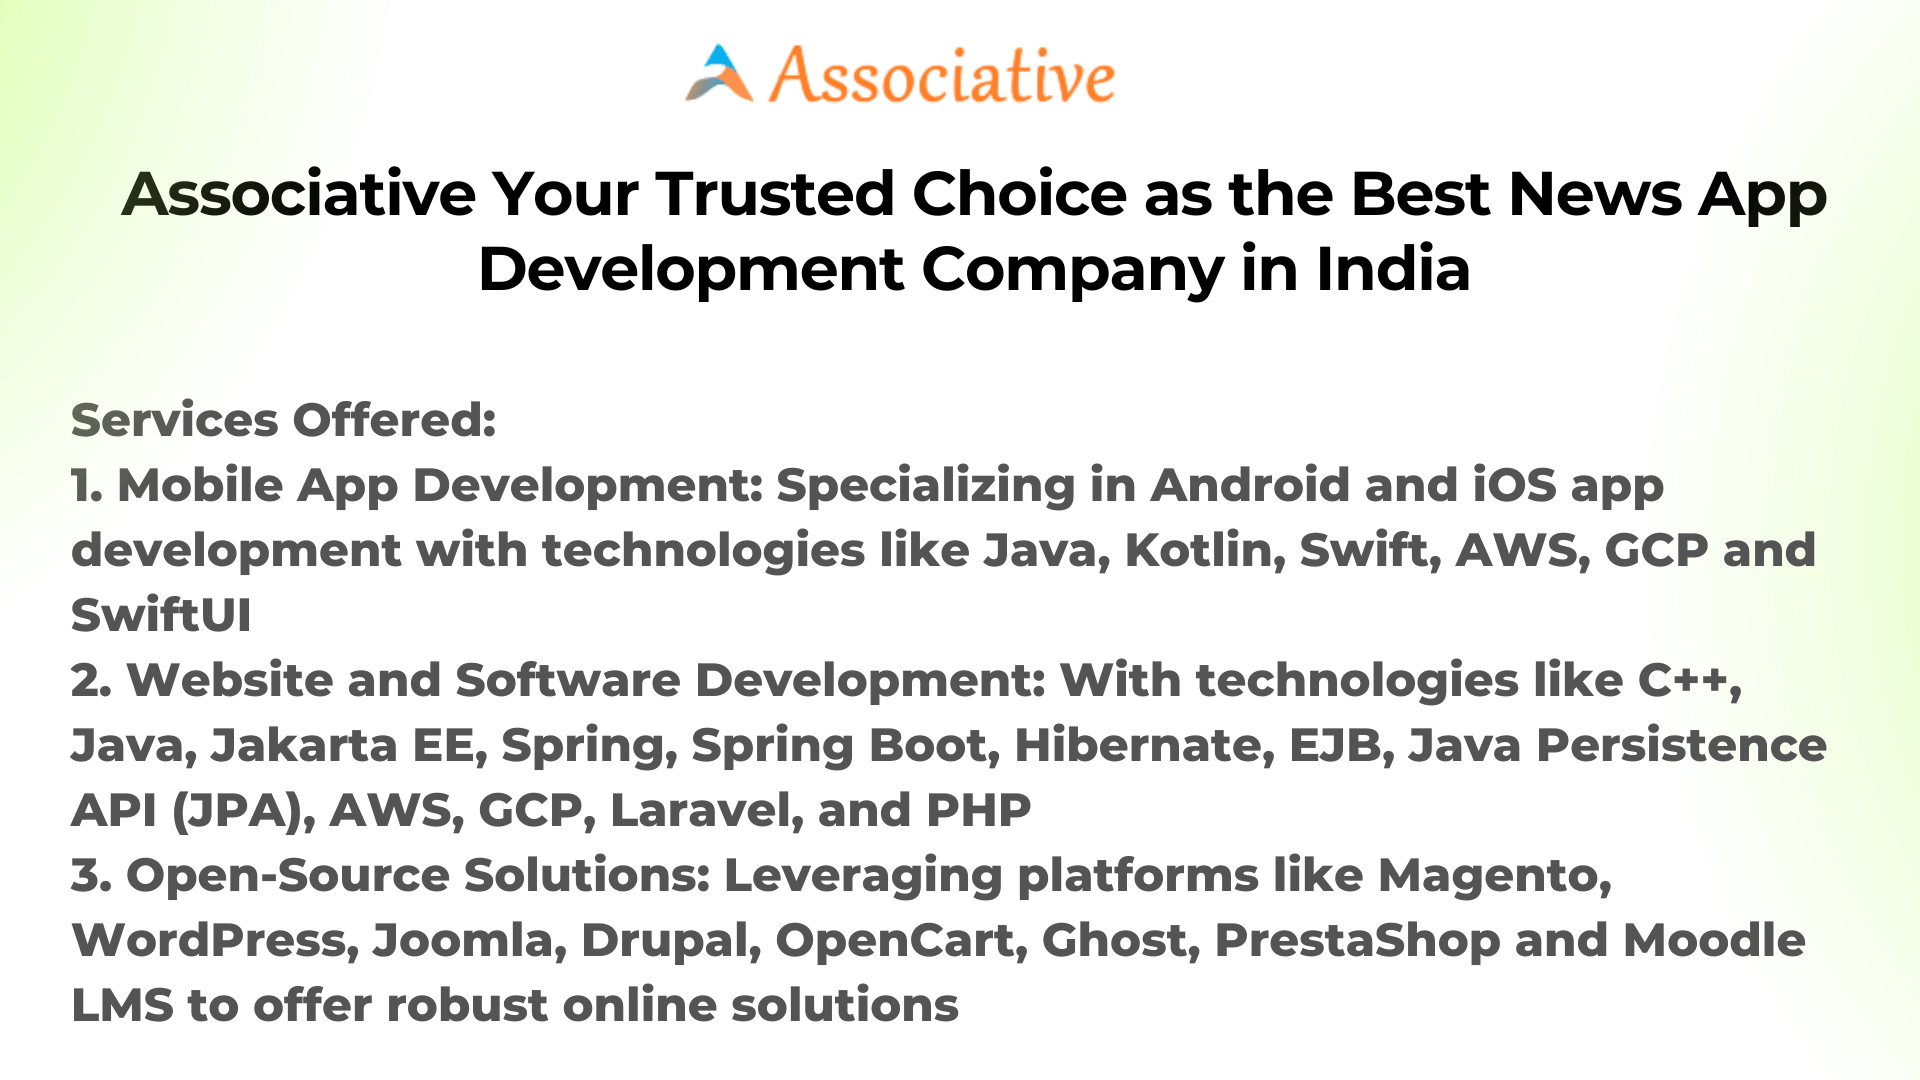 Associative Your Trusted Choice as the Best News App Development Company in India